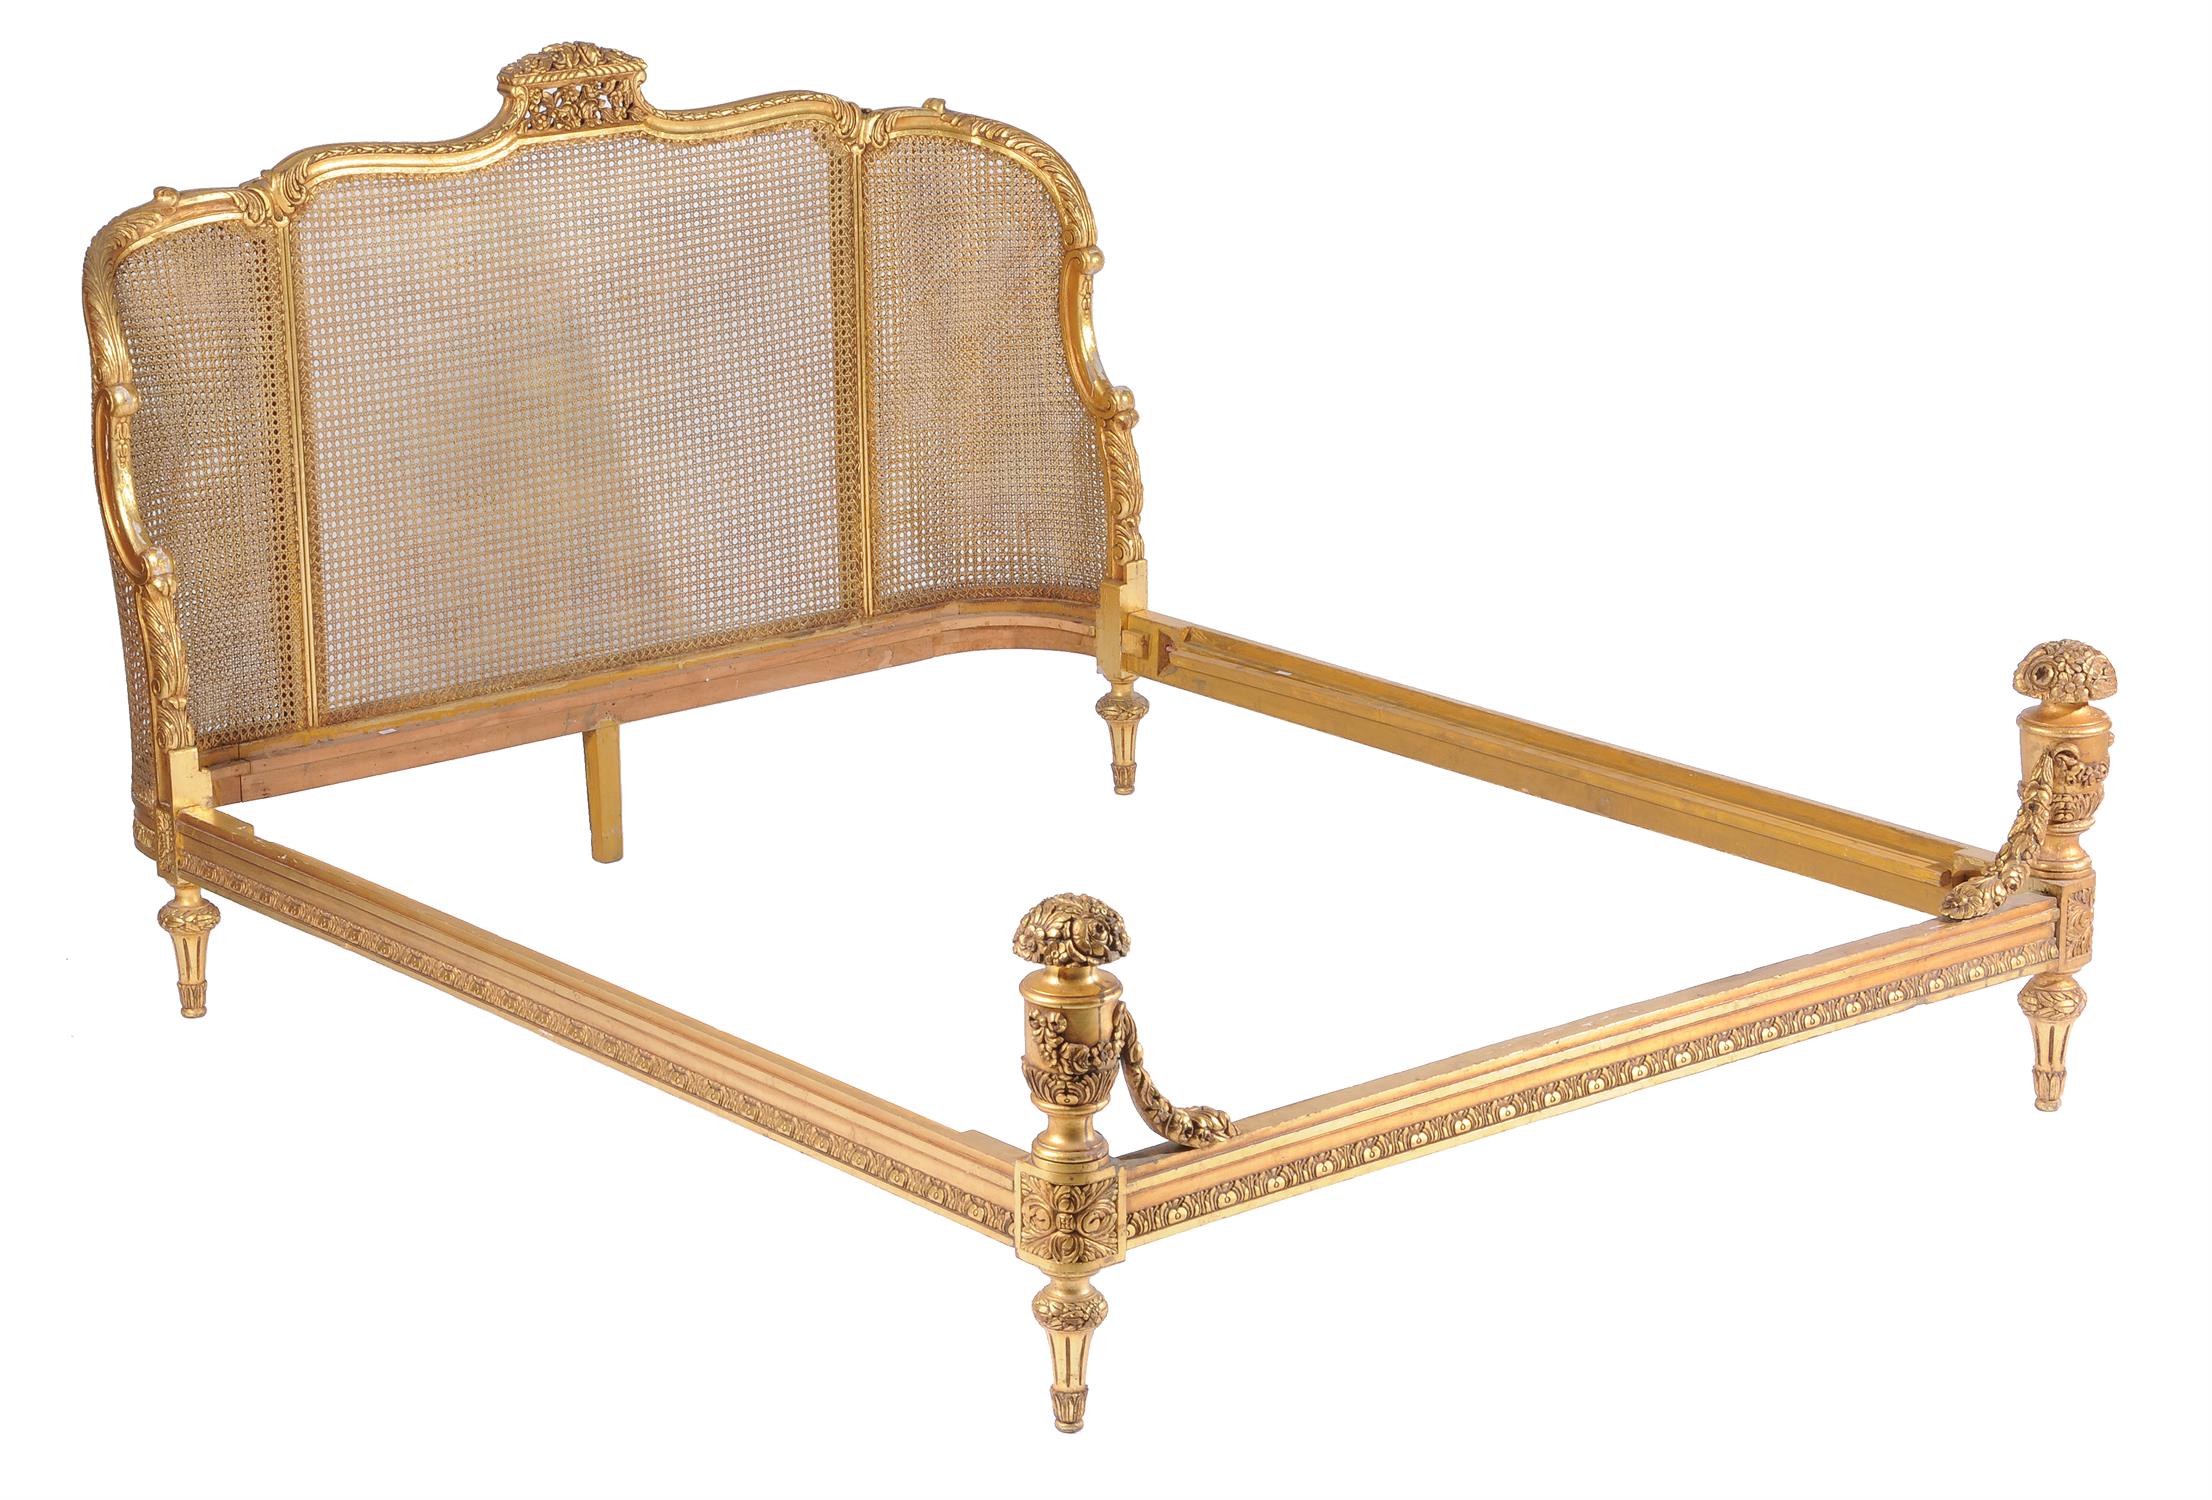 An early/mid-20th century French carved giltwood bed